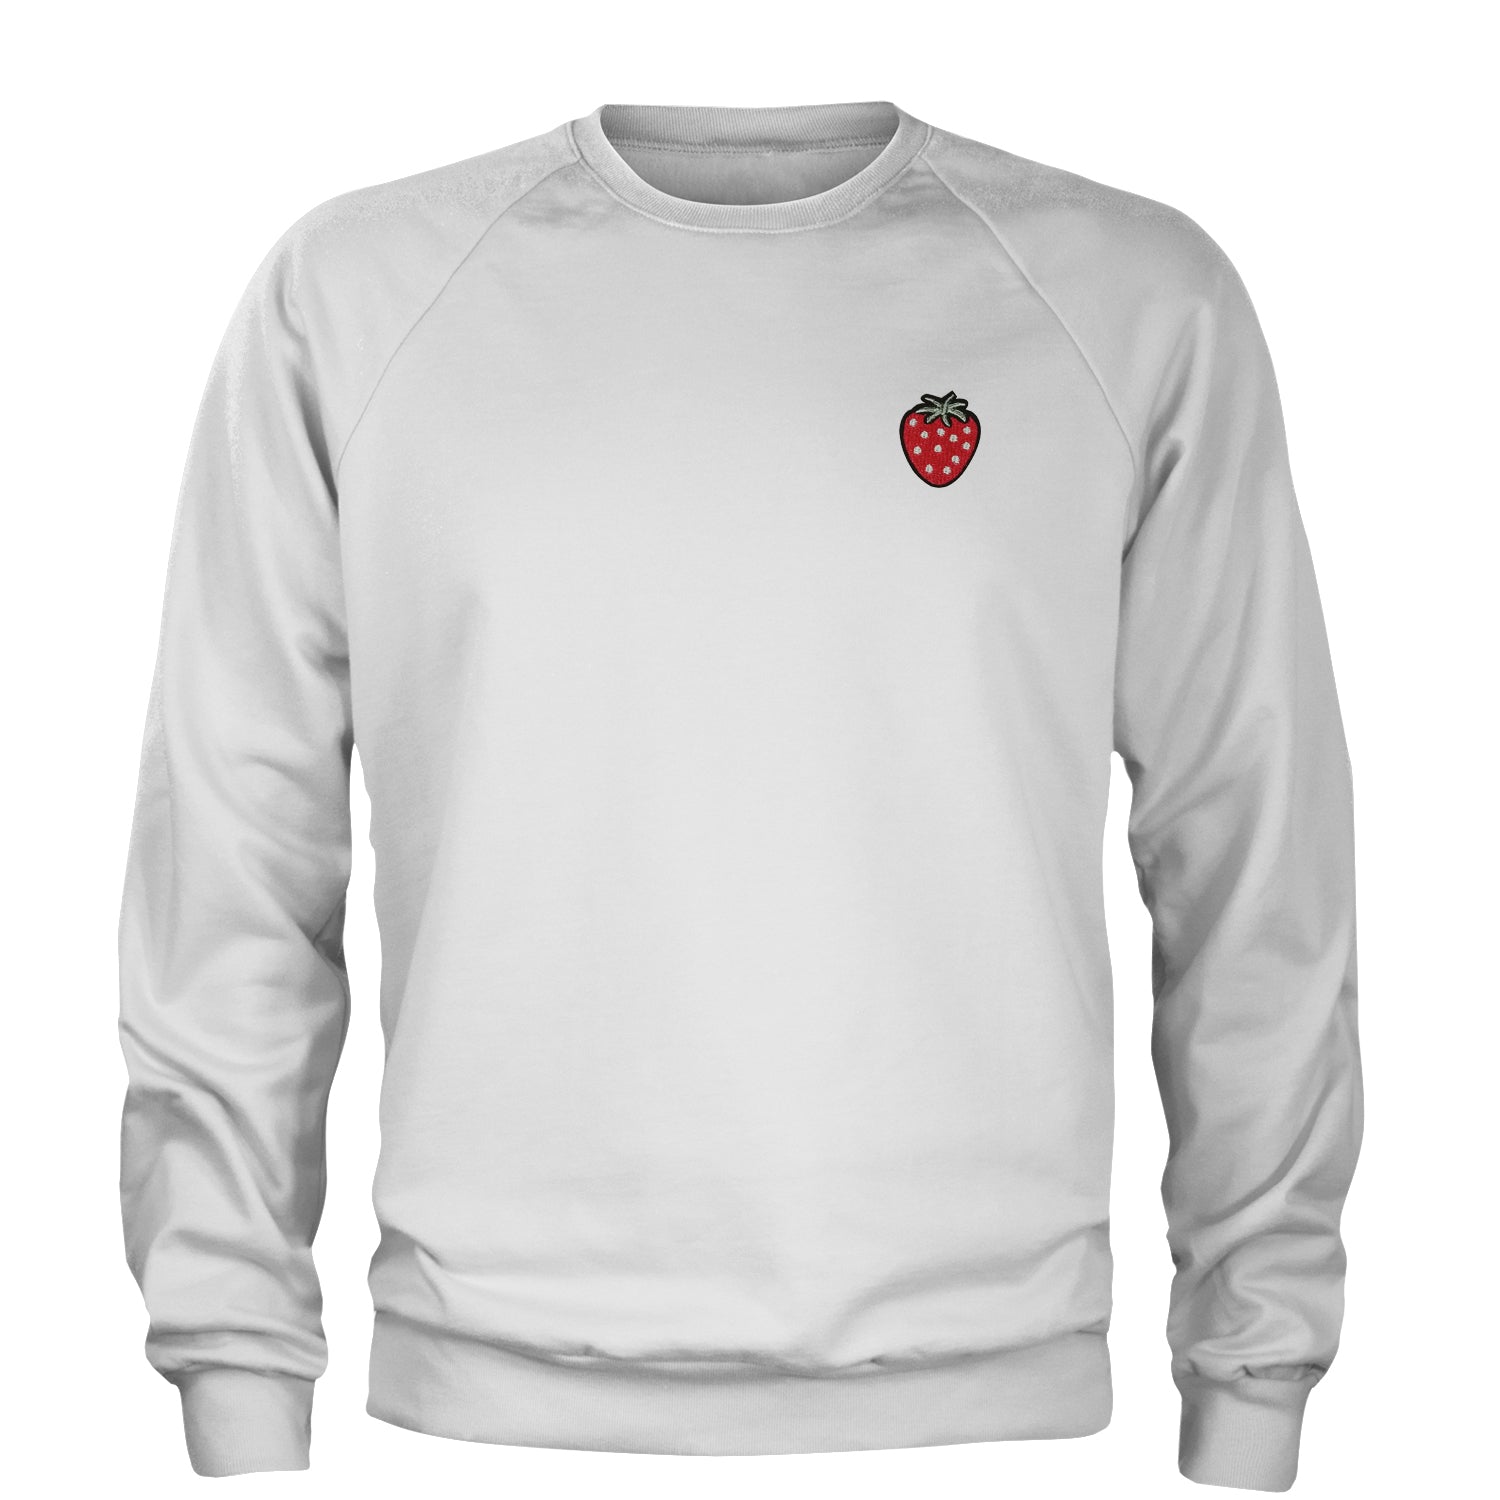 Embroidered Strawberry Patch (Pocket Print) Adult Crewneck Sweatshirt fruit, strawberries by Expression Tees